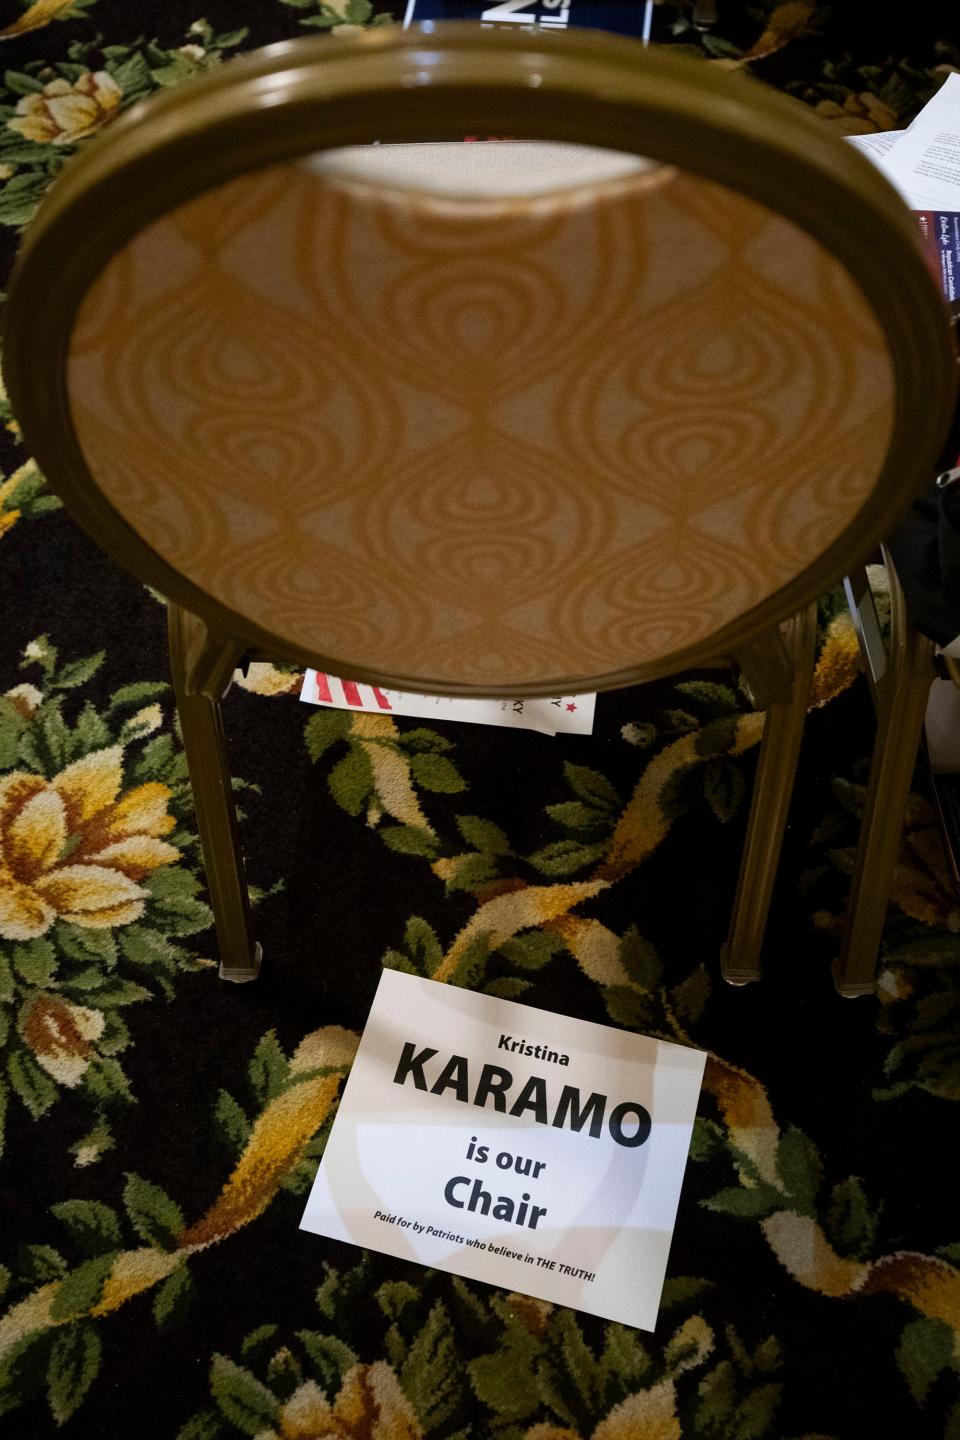 A sign on the floor under a chair says "Kristina Karamo is our chair, paid for by patriots who believe in the truth!"